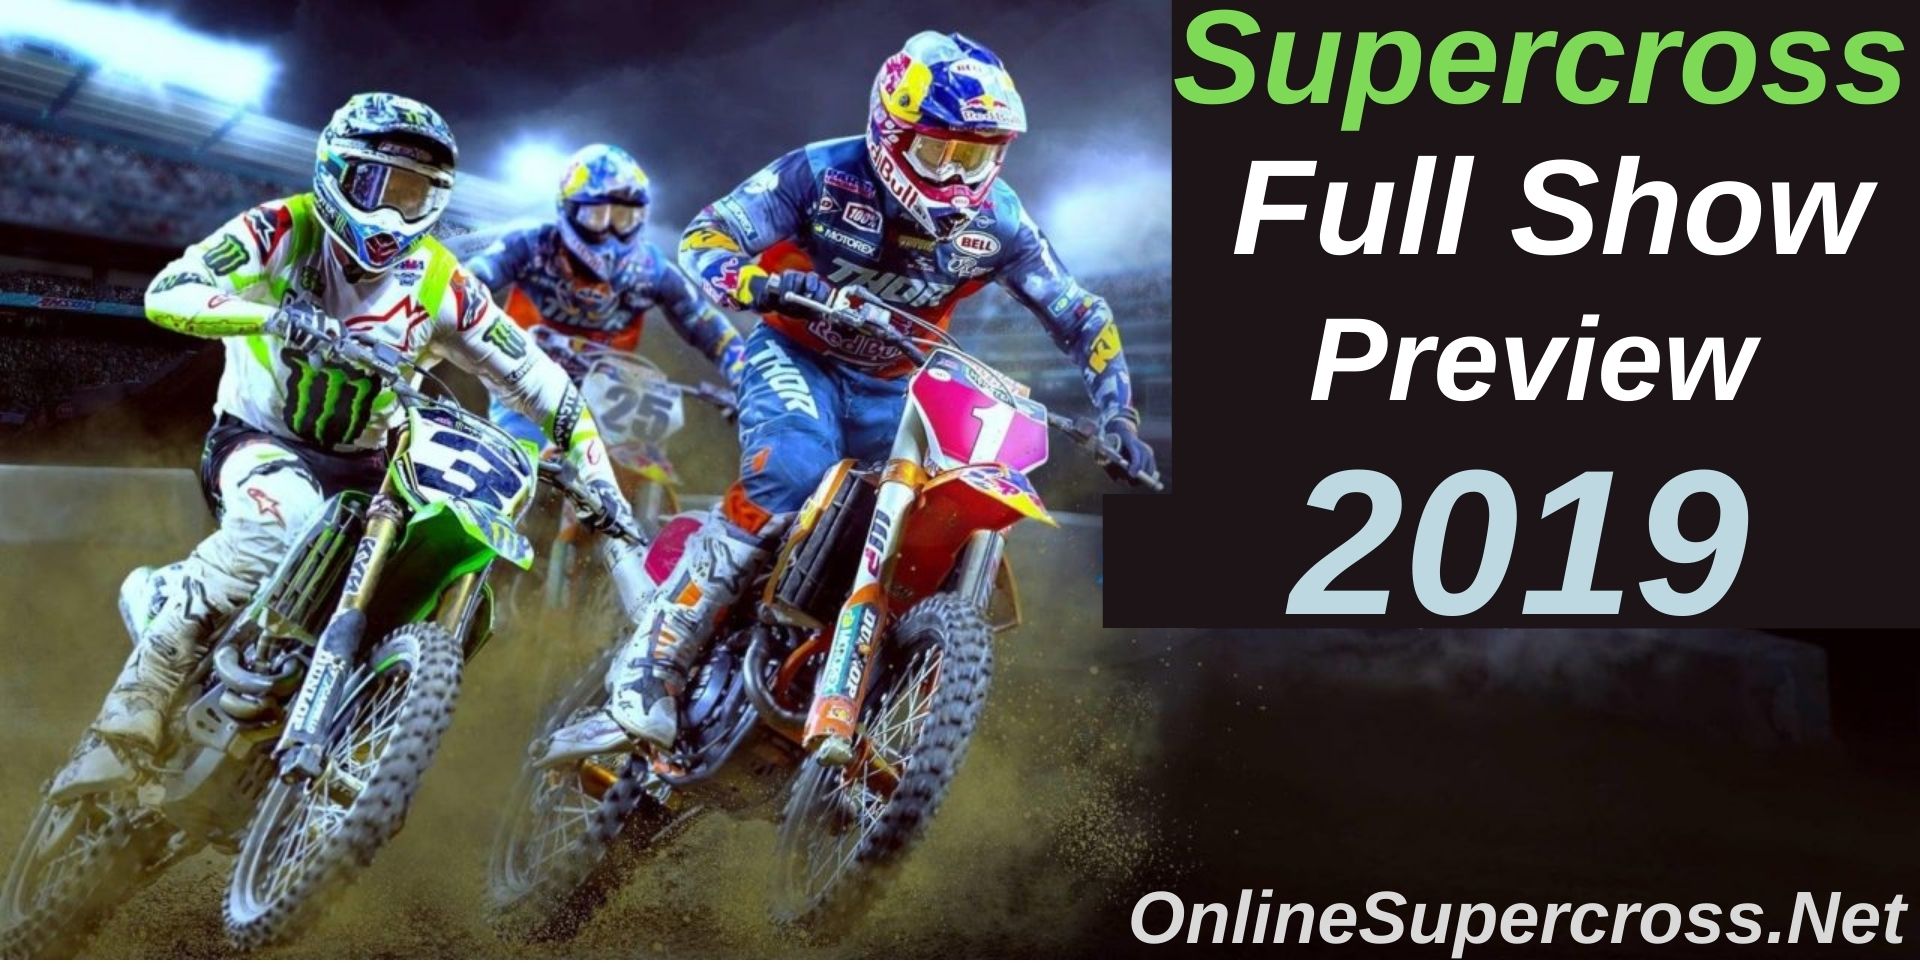 AMA Supercross Preview Full Show 2019